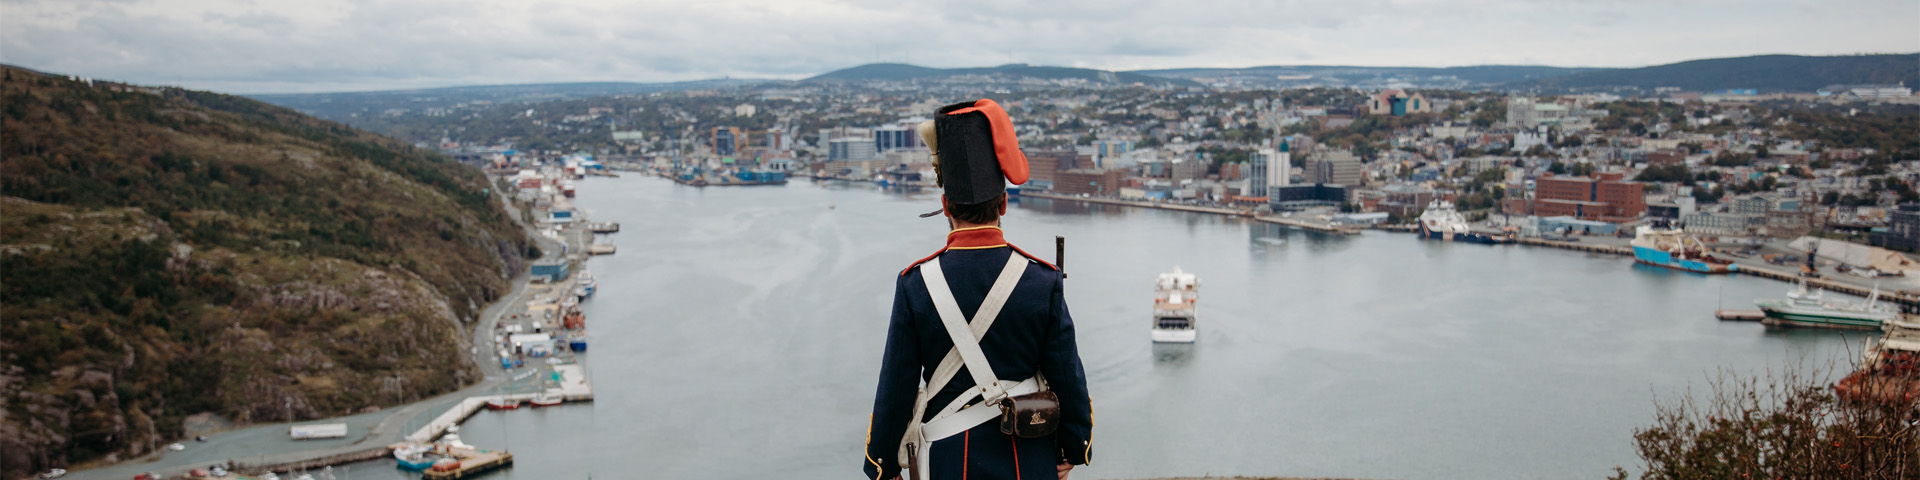 a man in an historic military uniform, overlooking a city harbour.